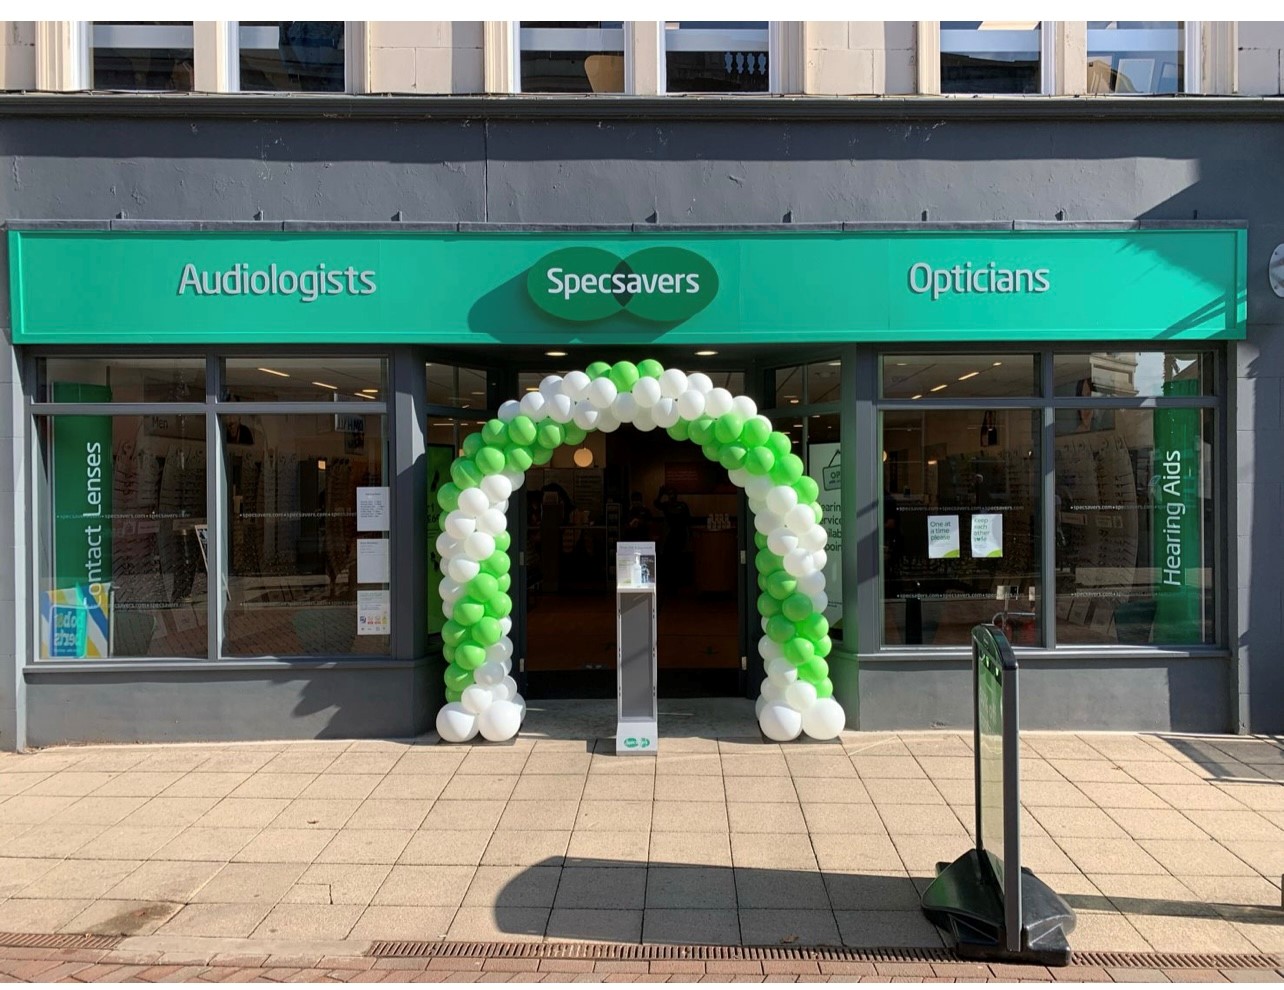 Images Specsavers Opticians and Audiologists - Falkirk